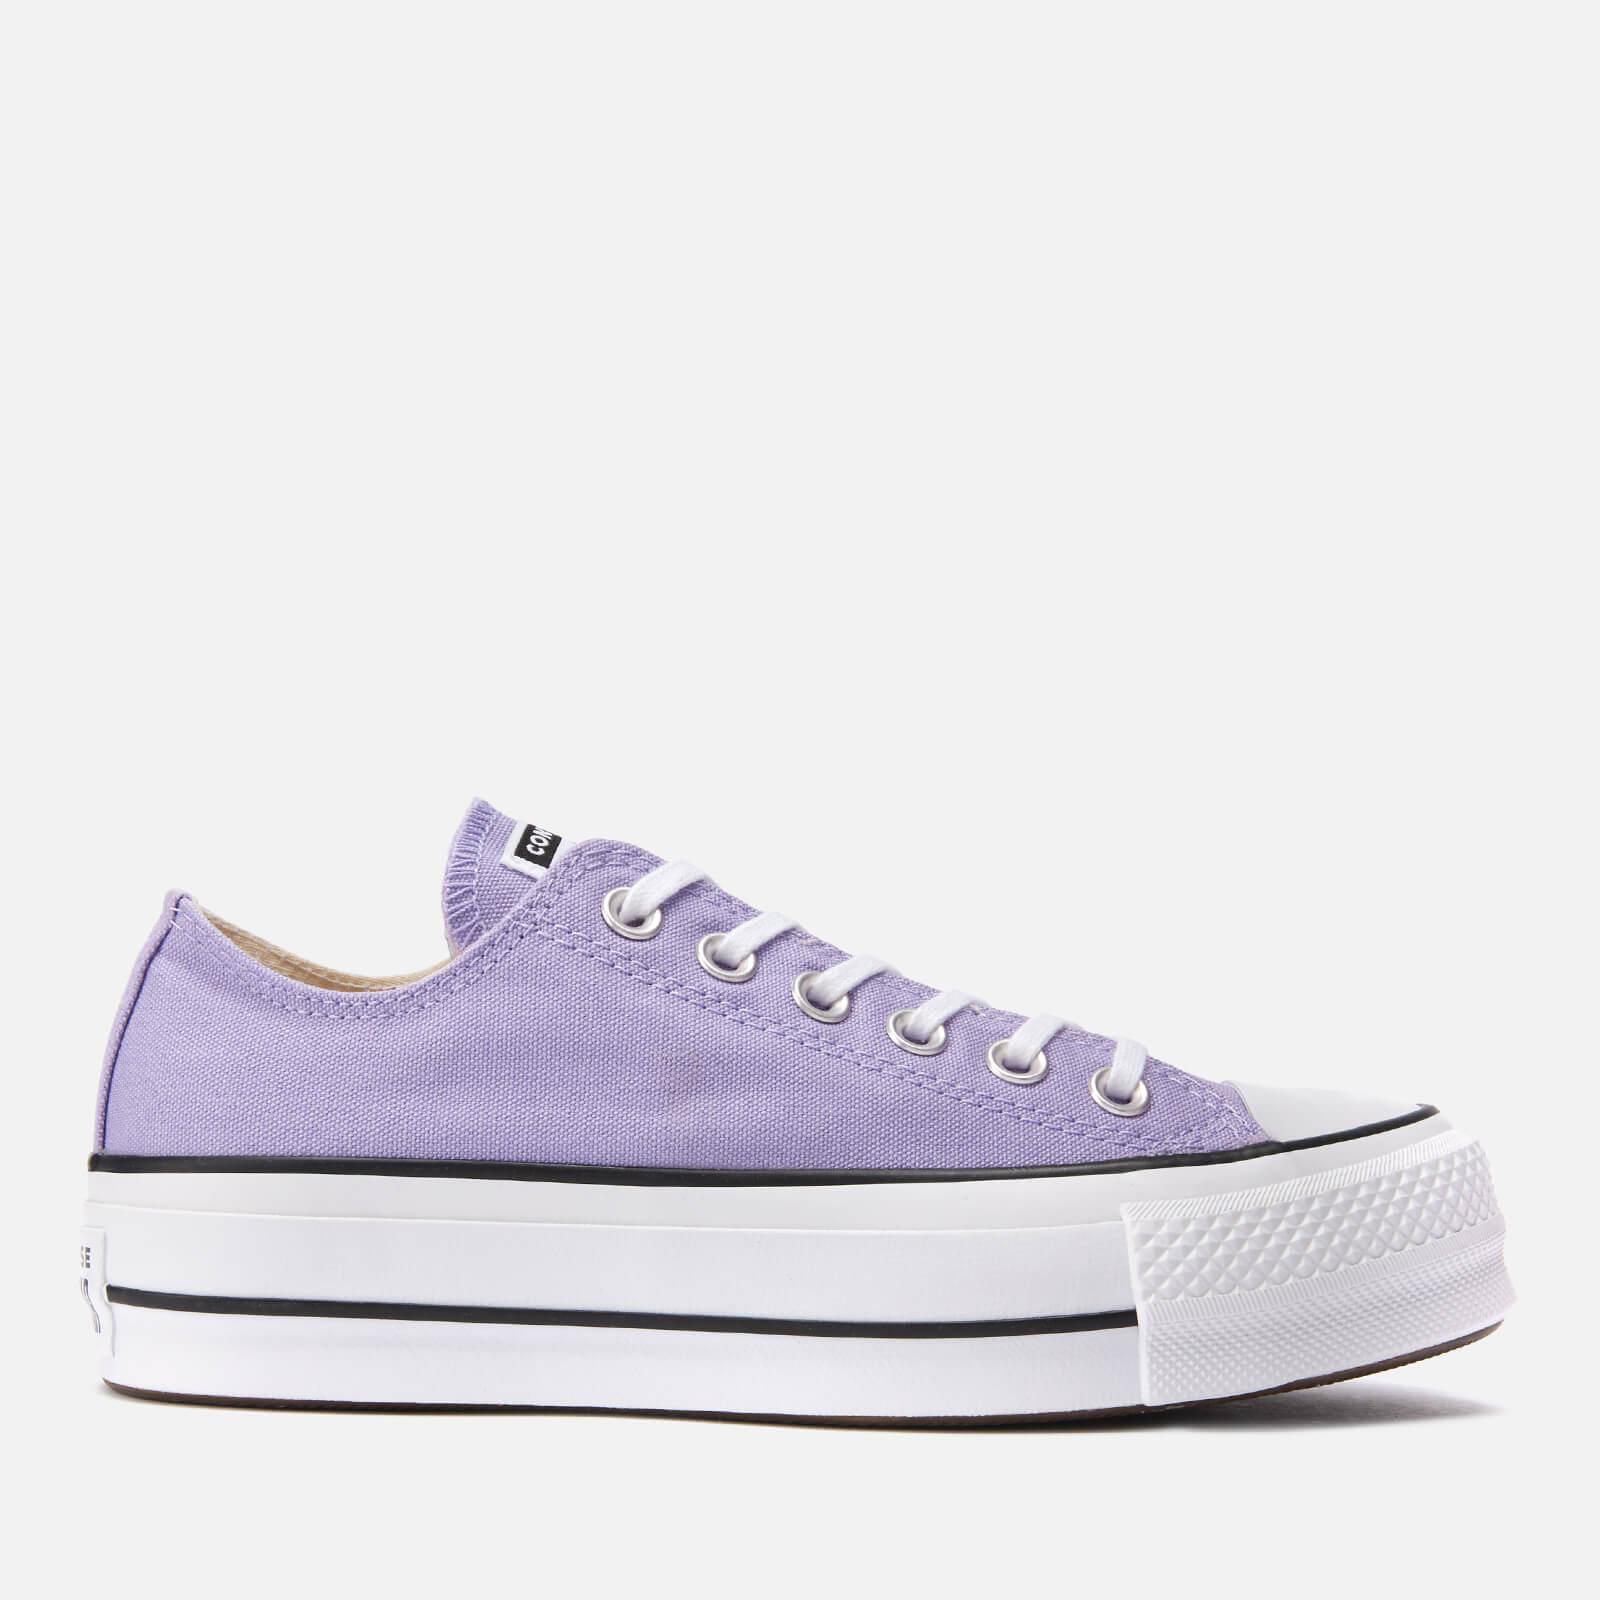 Converse Chuck Taylor All Star Lift Ox Trainers in Purple - Lyst